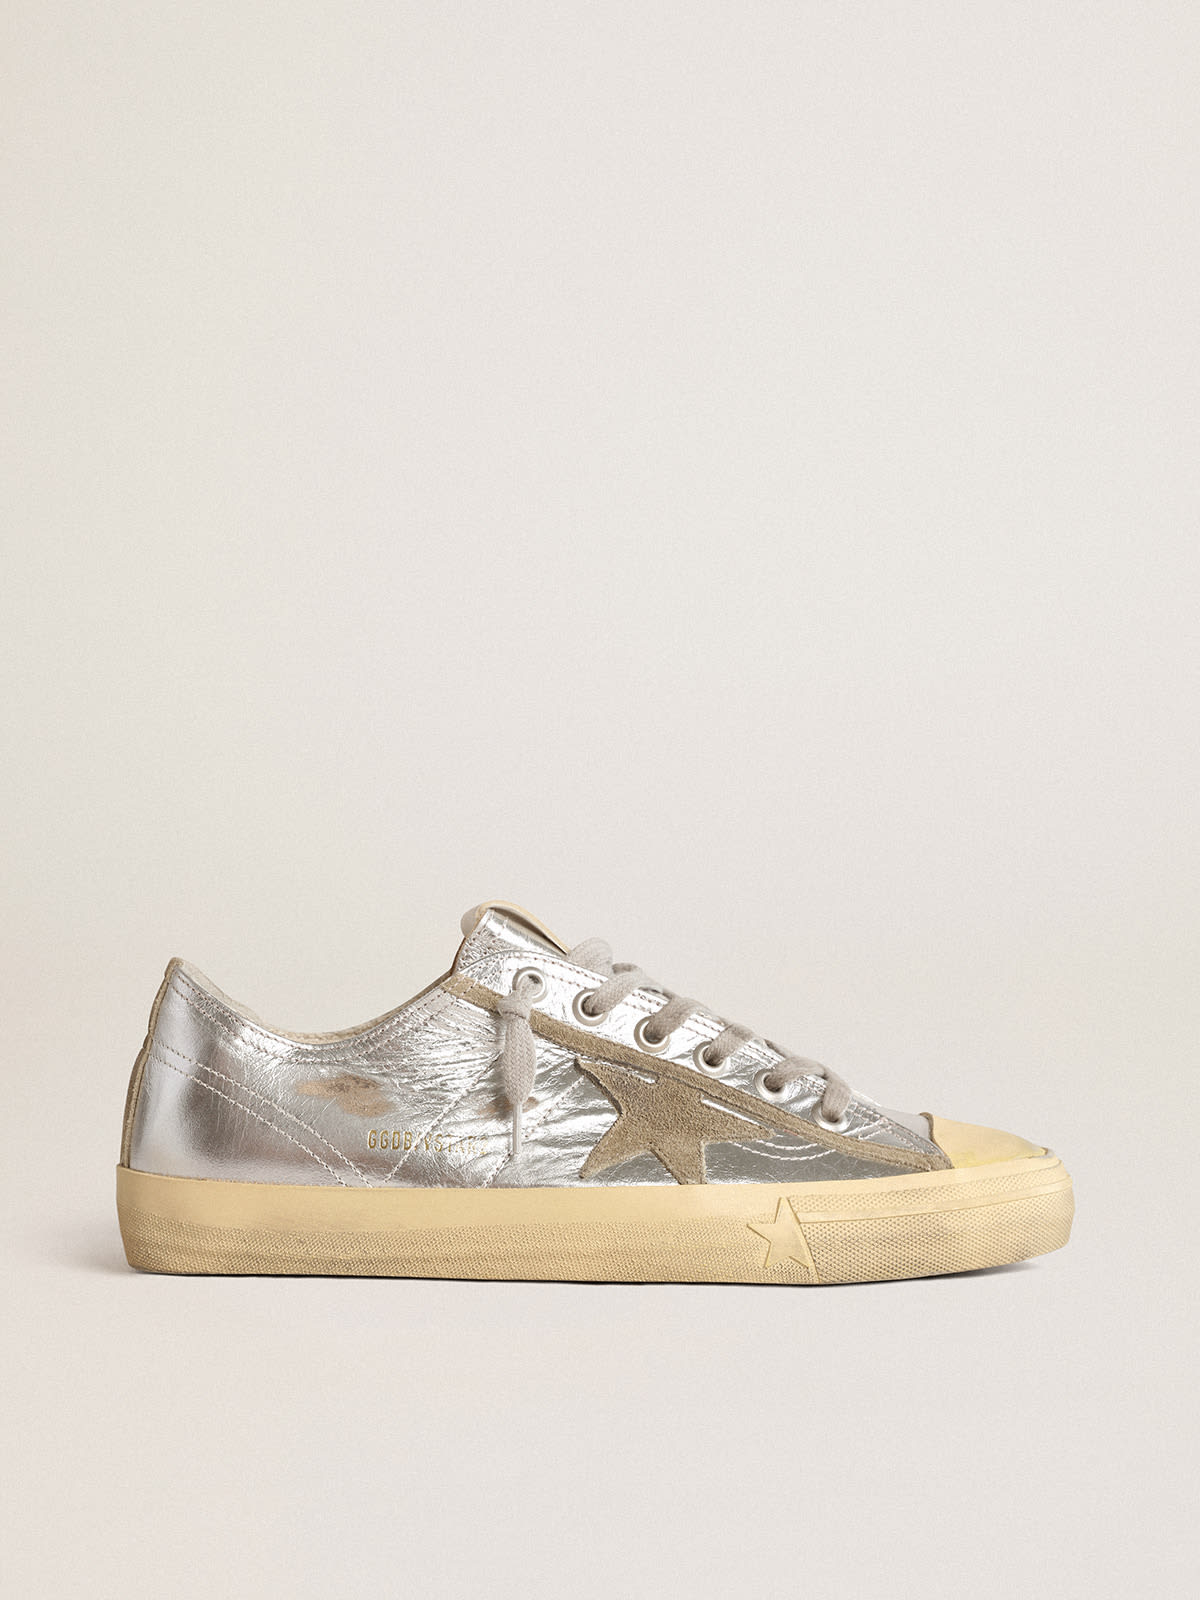 Golden Goose - Men’s V-Star LTD sneakers in silver metallic leather with star in ice-gray suede in 